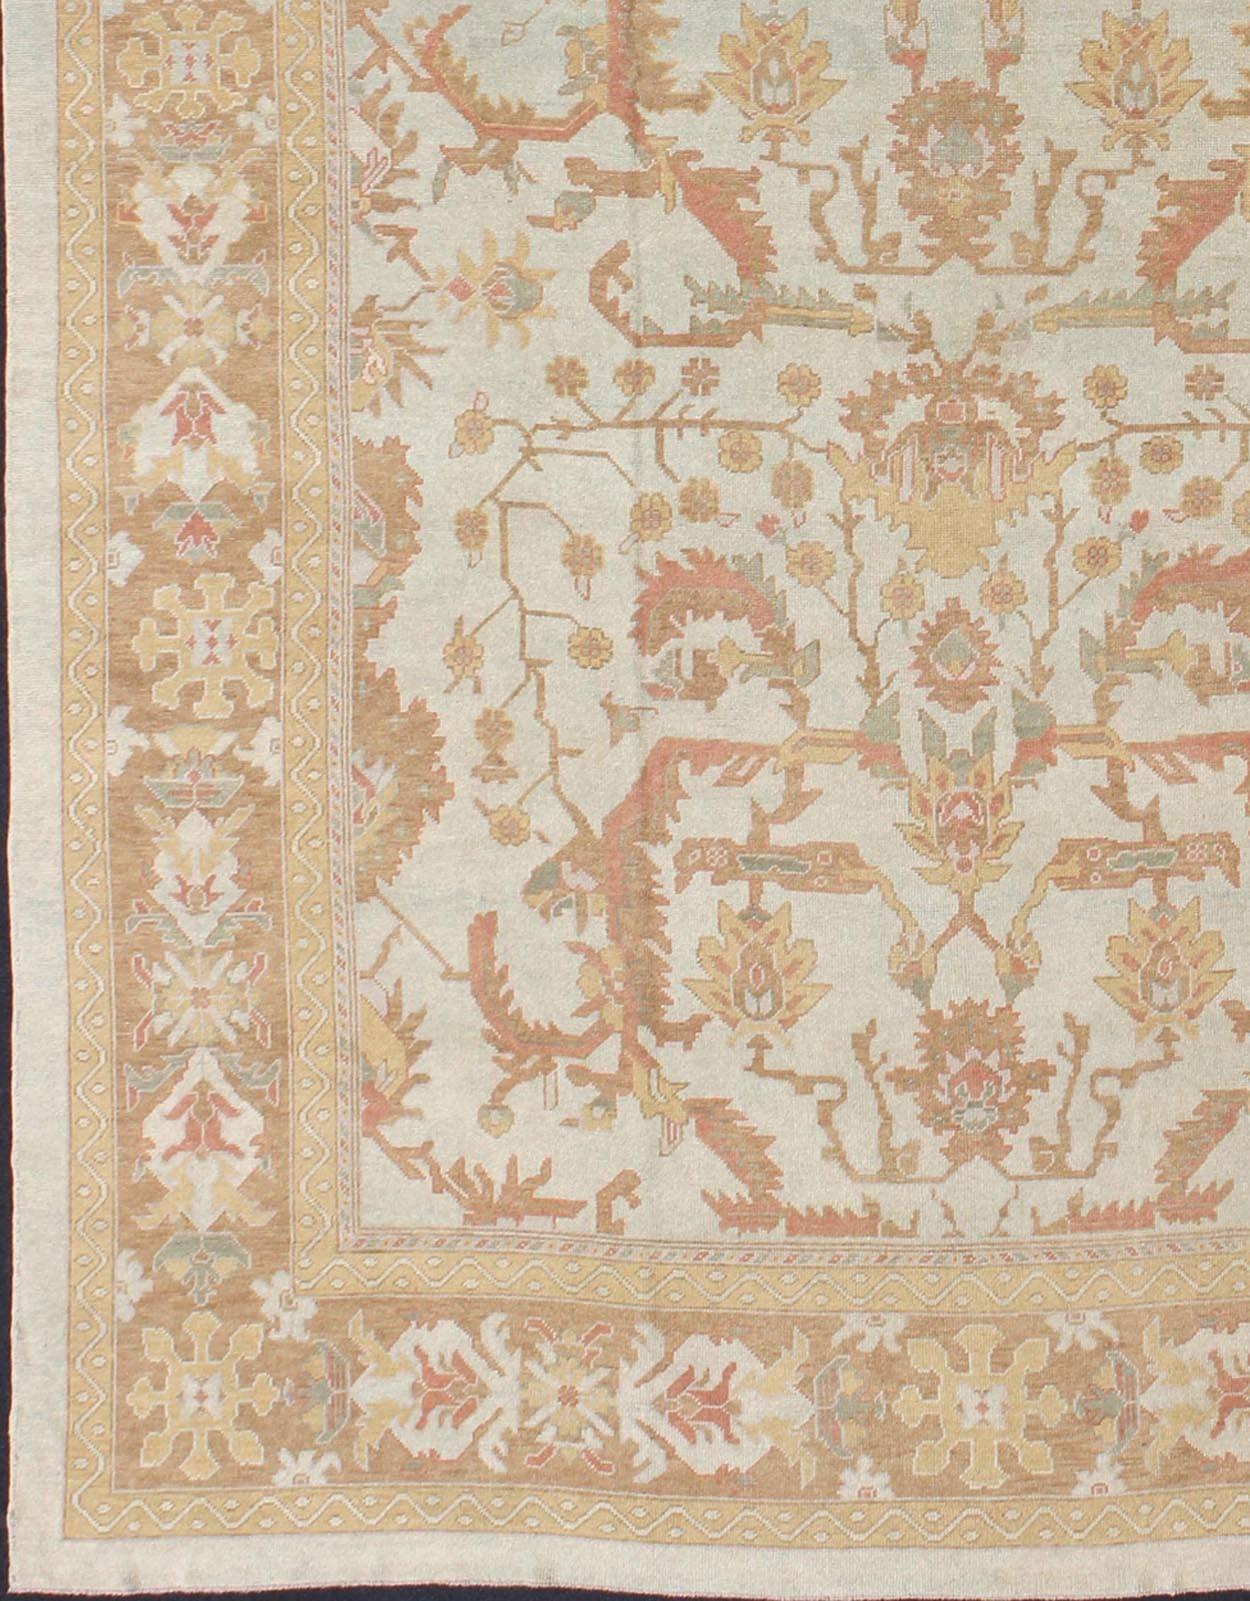 This Oushak rug was hand knotted in Turkey. This woven art boasts a unique color palette, featuring silver tone background, cream light blue, soft terra cotta,  green, light brown and yellow tones, . The border displays repeating arts & crafts